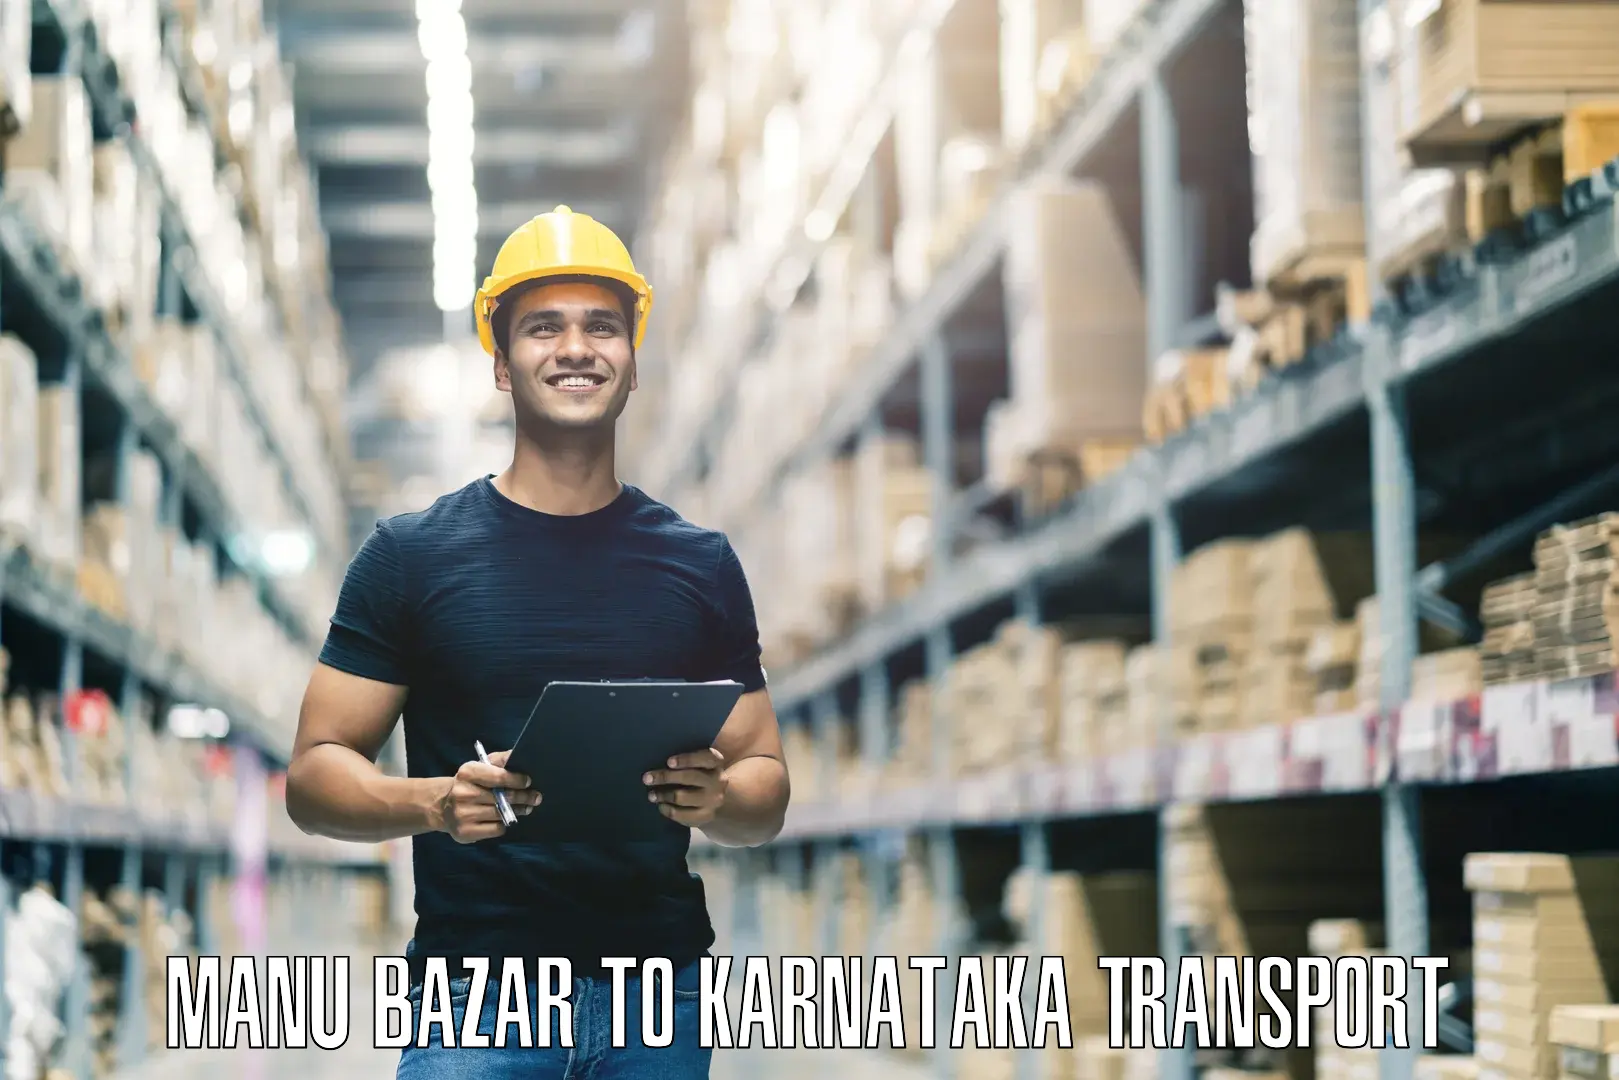 Delivery service Manu Bazar to Manipal